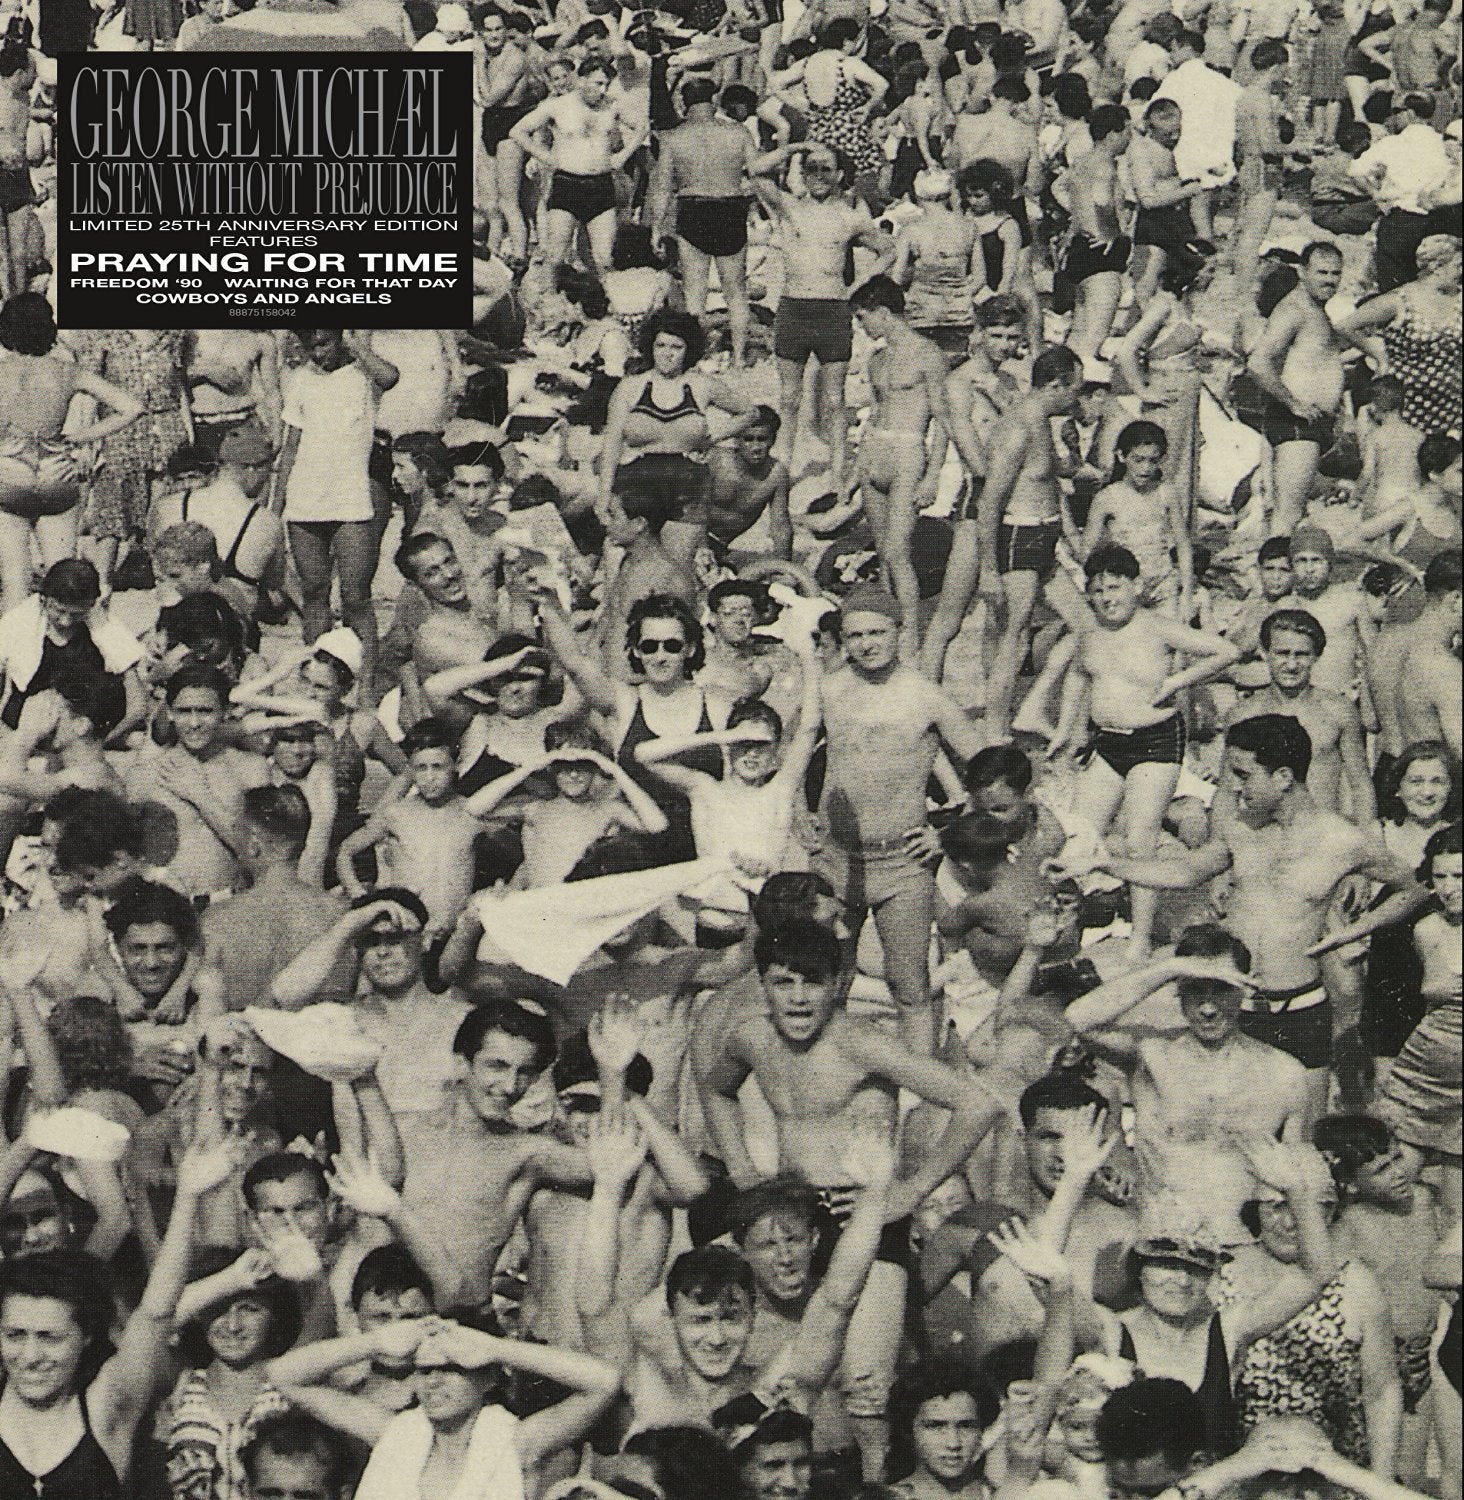 George Michael - Listen Without Prejudice (Remastered)